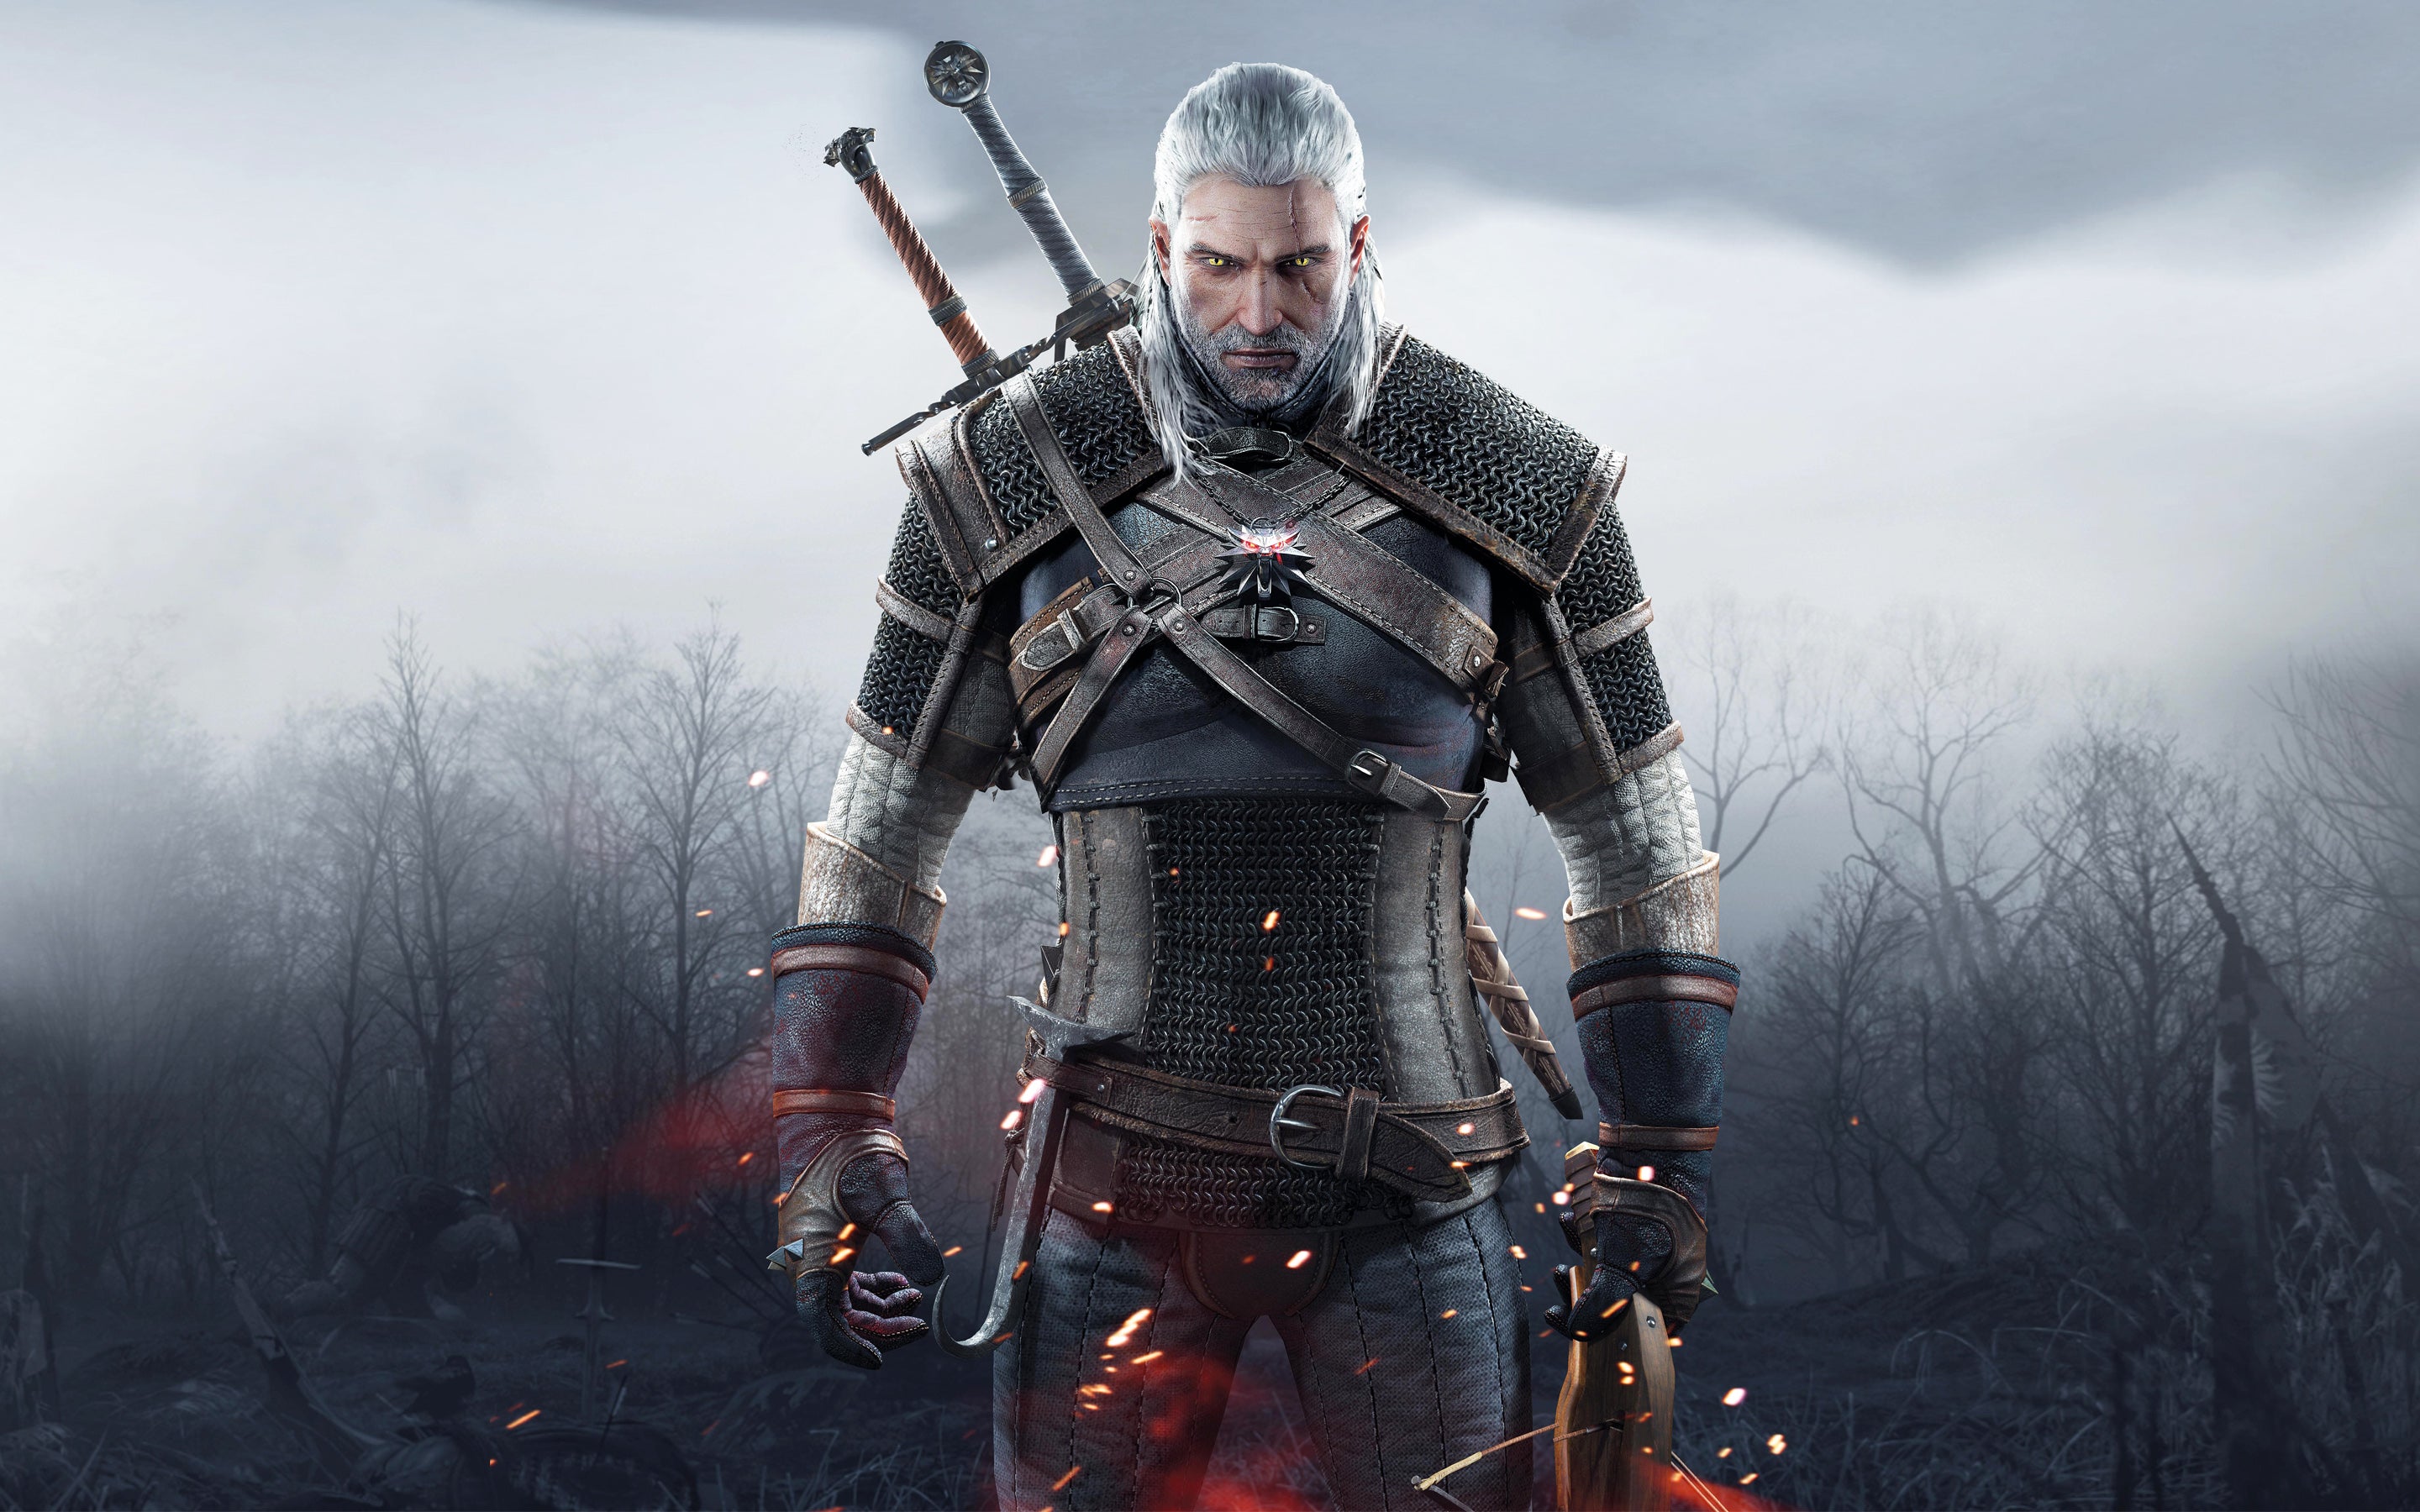 Image for New The Witcher 3 screenshots show combat, exploration and general carousing